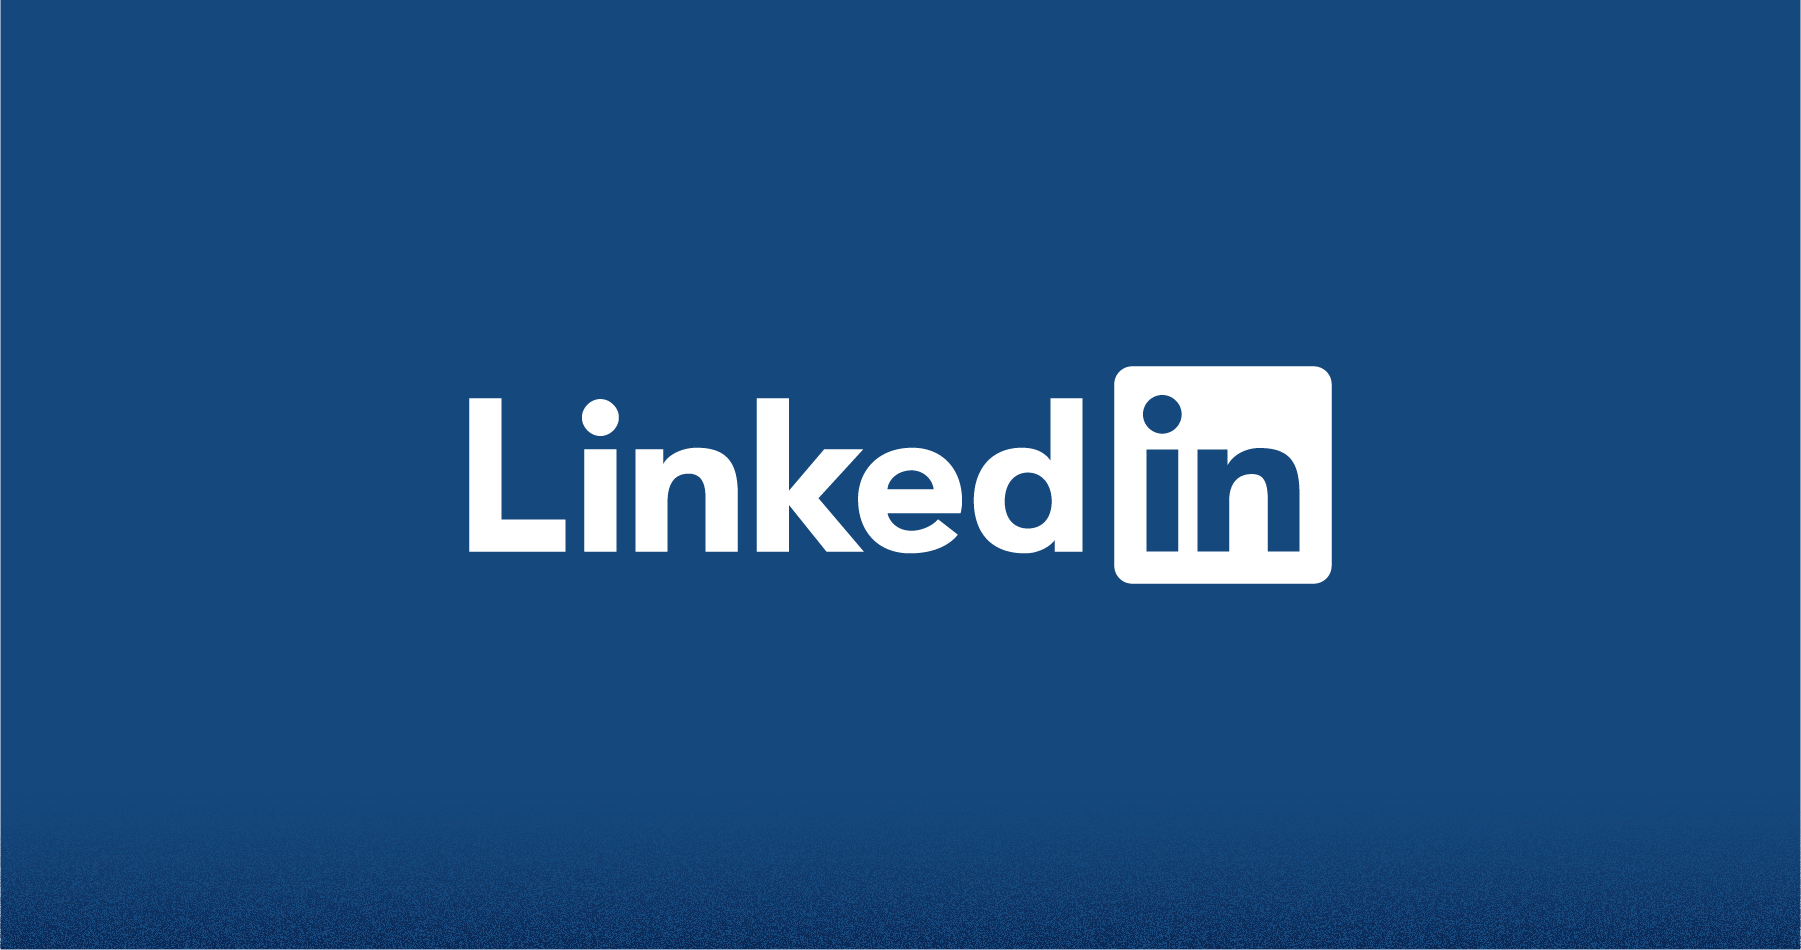 10 Tips to Protect Yourself from LinkedIn Scams